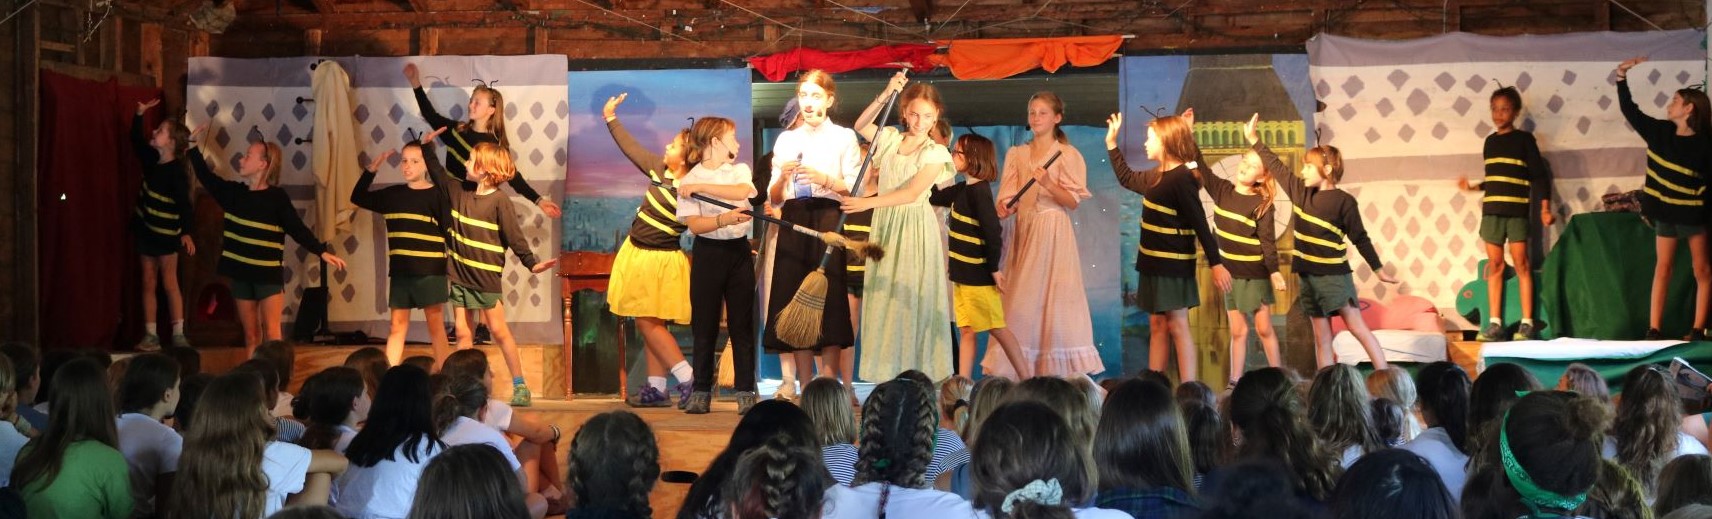 Hive Performing Arts putting on a show with campers singing dressed like bees.